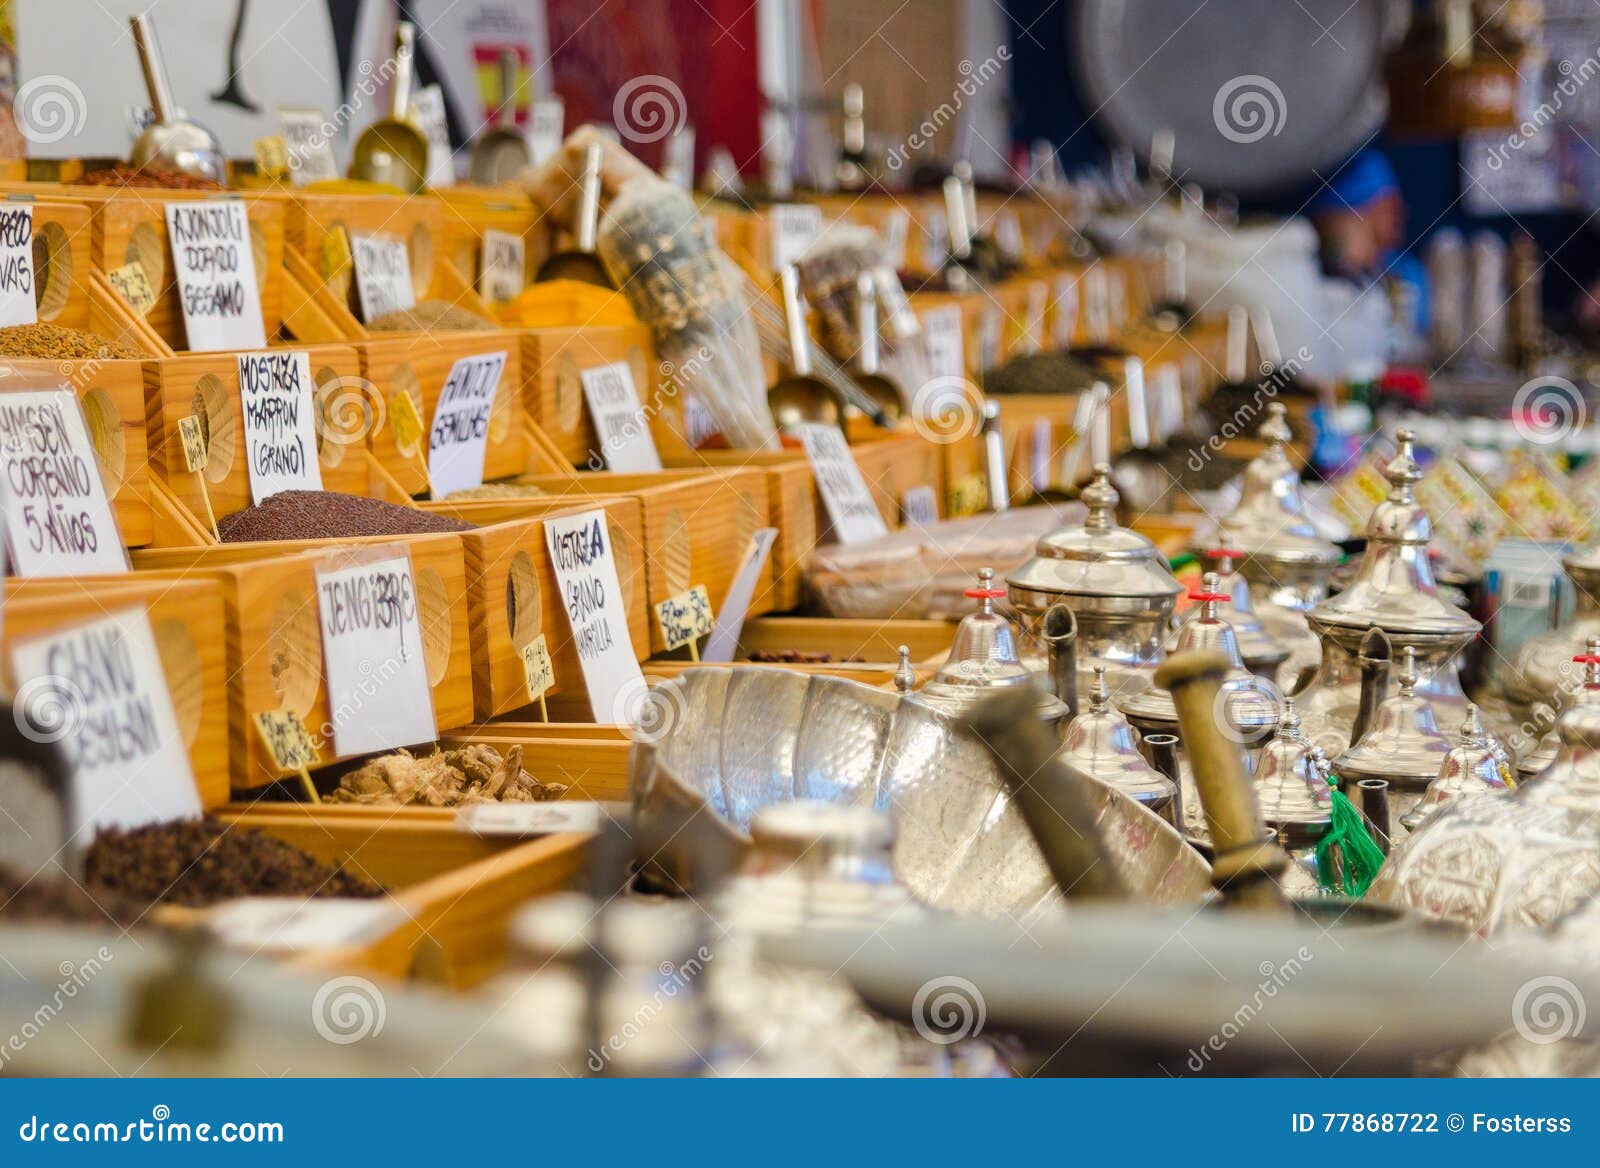 many spices at the arabic market.